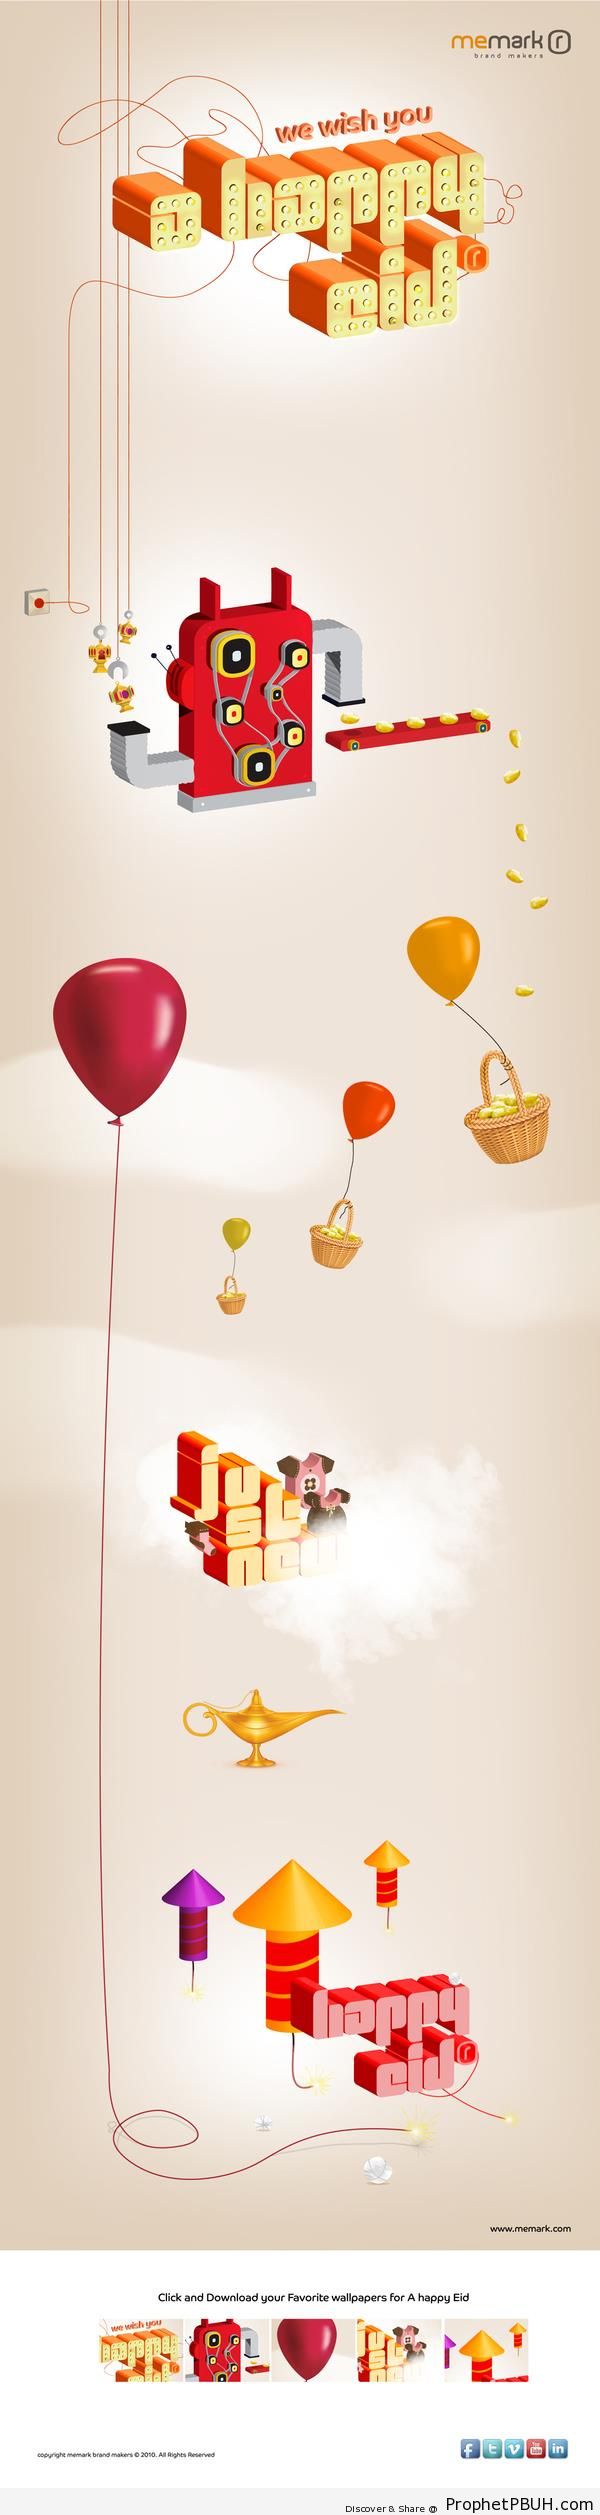 Happy Eid Greeting with Oil Lamp, Balloons, and Fireworks - Drawings of Balloons